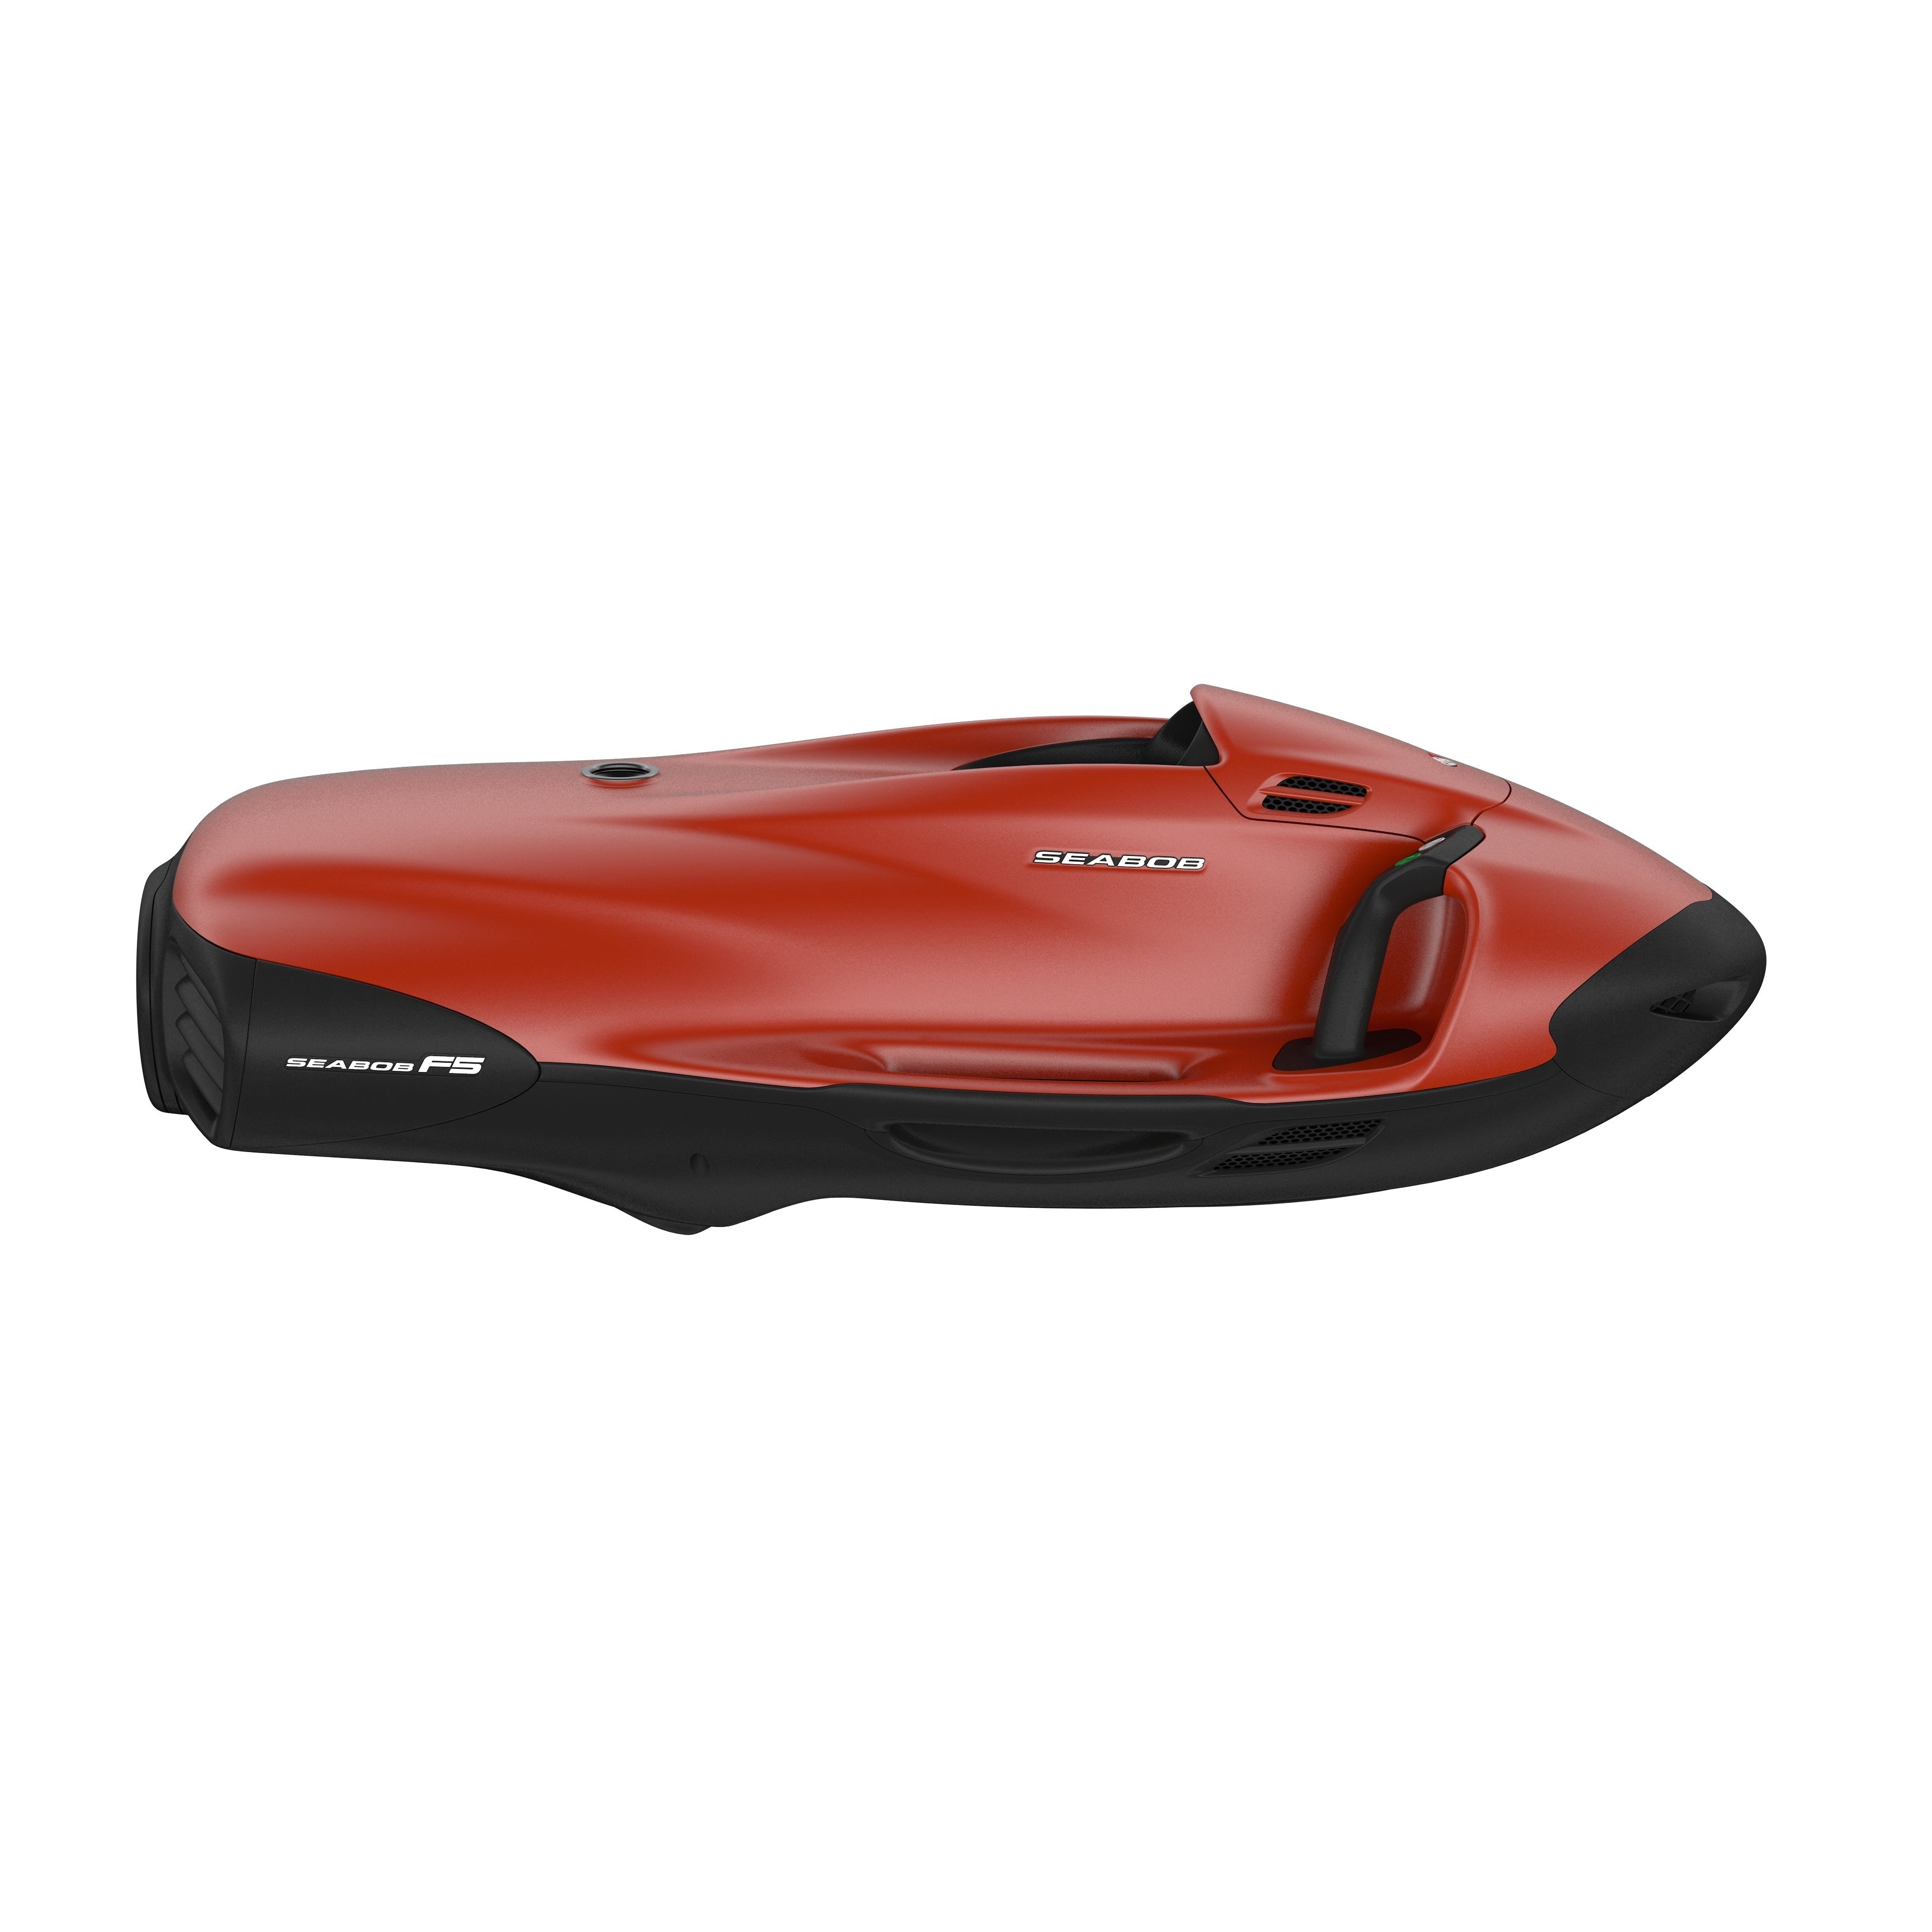 Seabob F5 Underwater Scooter SB-F5 – Light As Air Boats